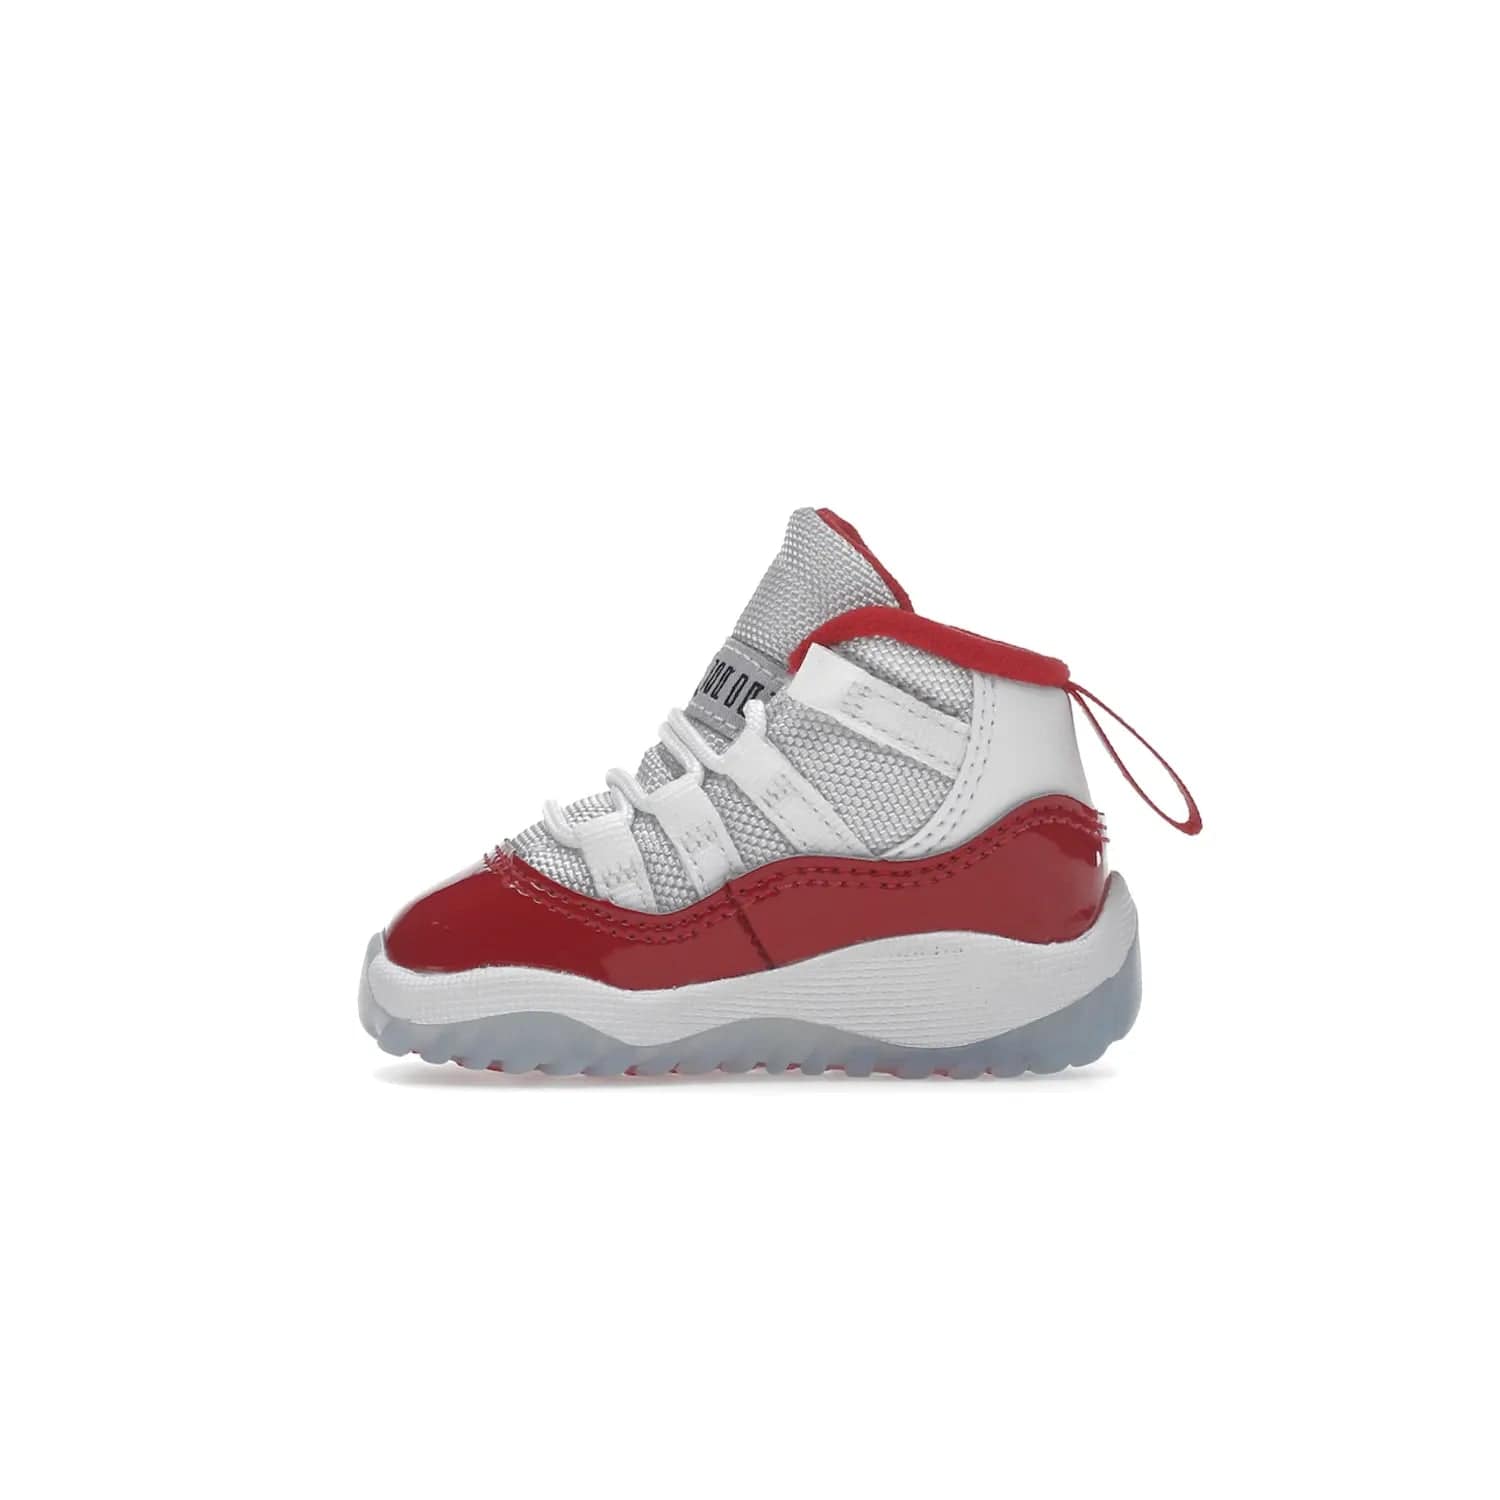 Jordan 11 Retro Cherry (2022) (TD) - Image 19 - Only at www.BallersClubKickz.com - Timeless classic. Air Jordan 11 Retro Cherry 2022 TD combines mesh, leather & suede for a unique look. White upper with varsity red suede. Jumpman logo on collar & tongue. Available Dec 10th, priced at $80.